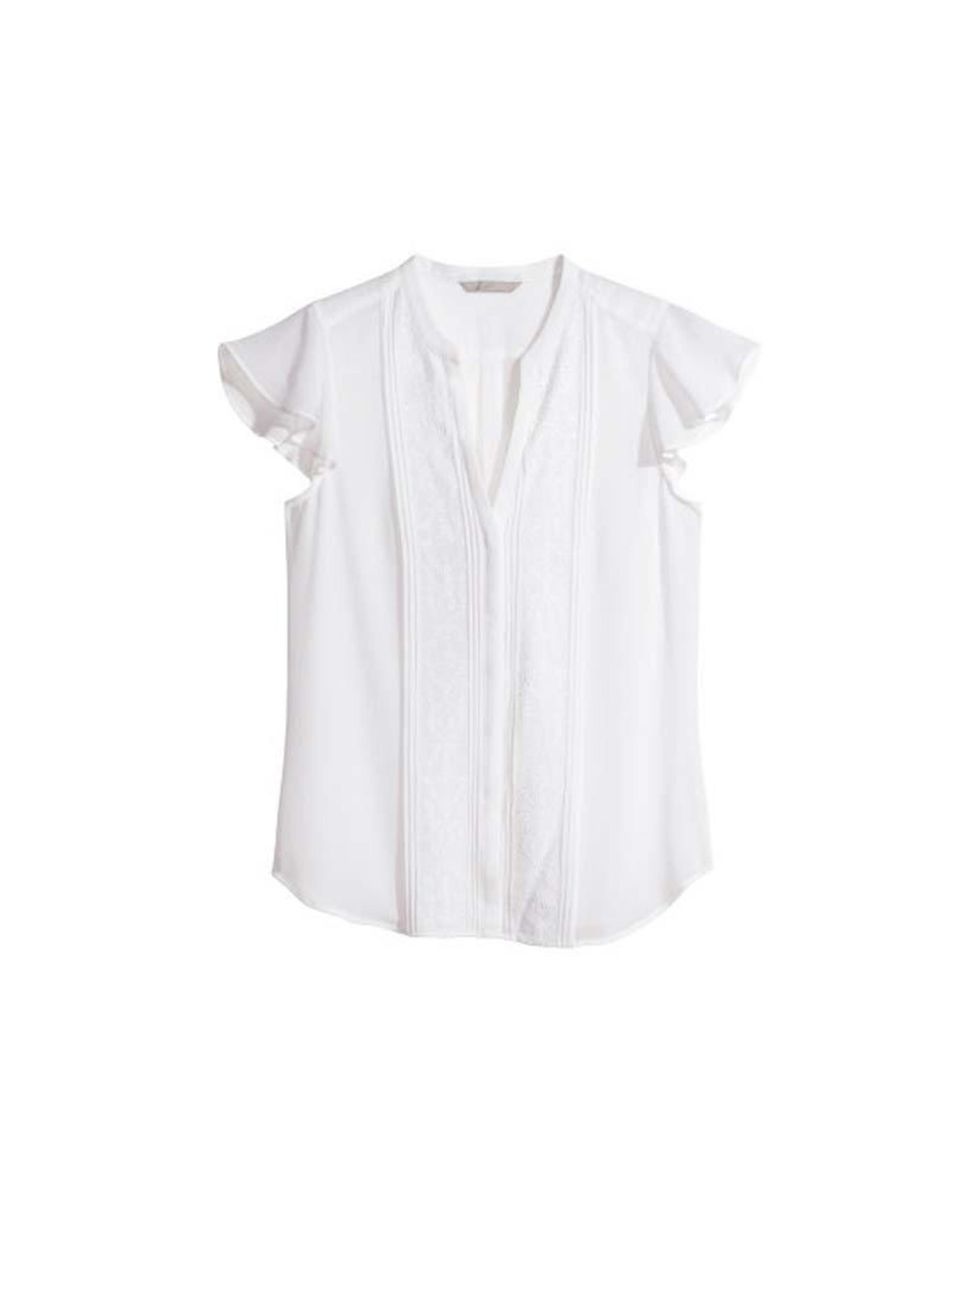 <p>Add white cotton blouse like this one from <a href="http://www.hm.com/gb/product/25891?article=25891-C">H&amp;M</a>, £14.99</p>